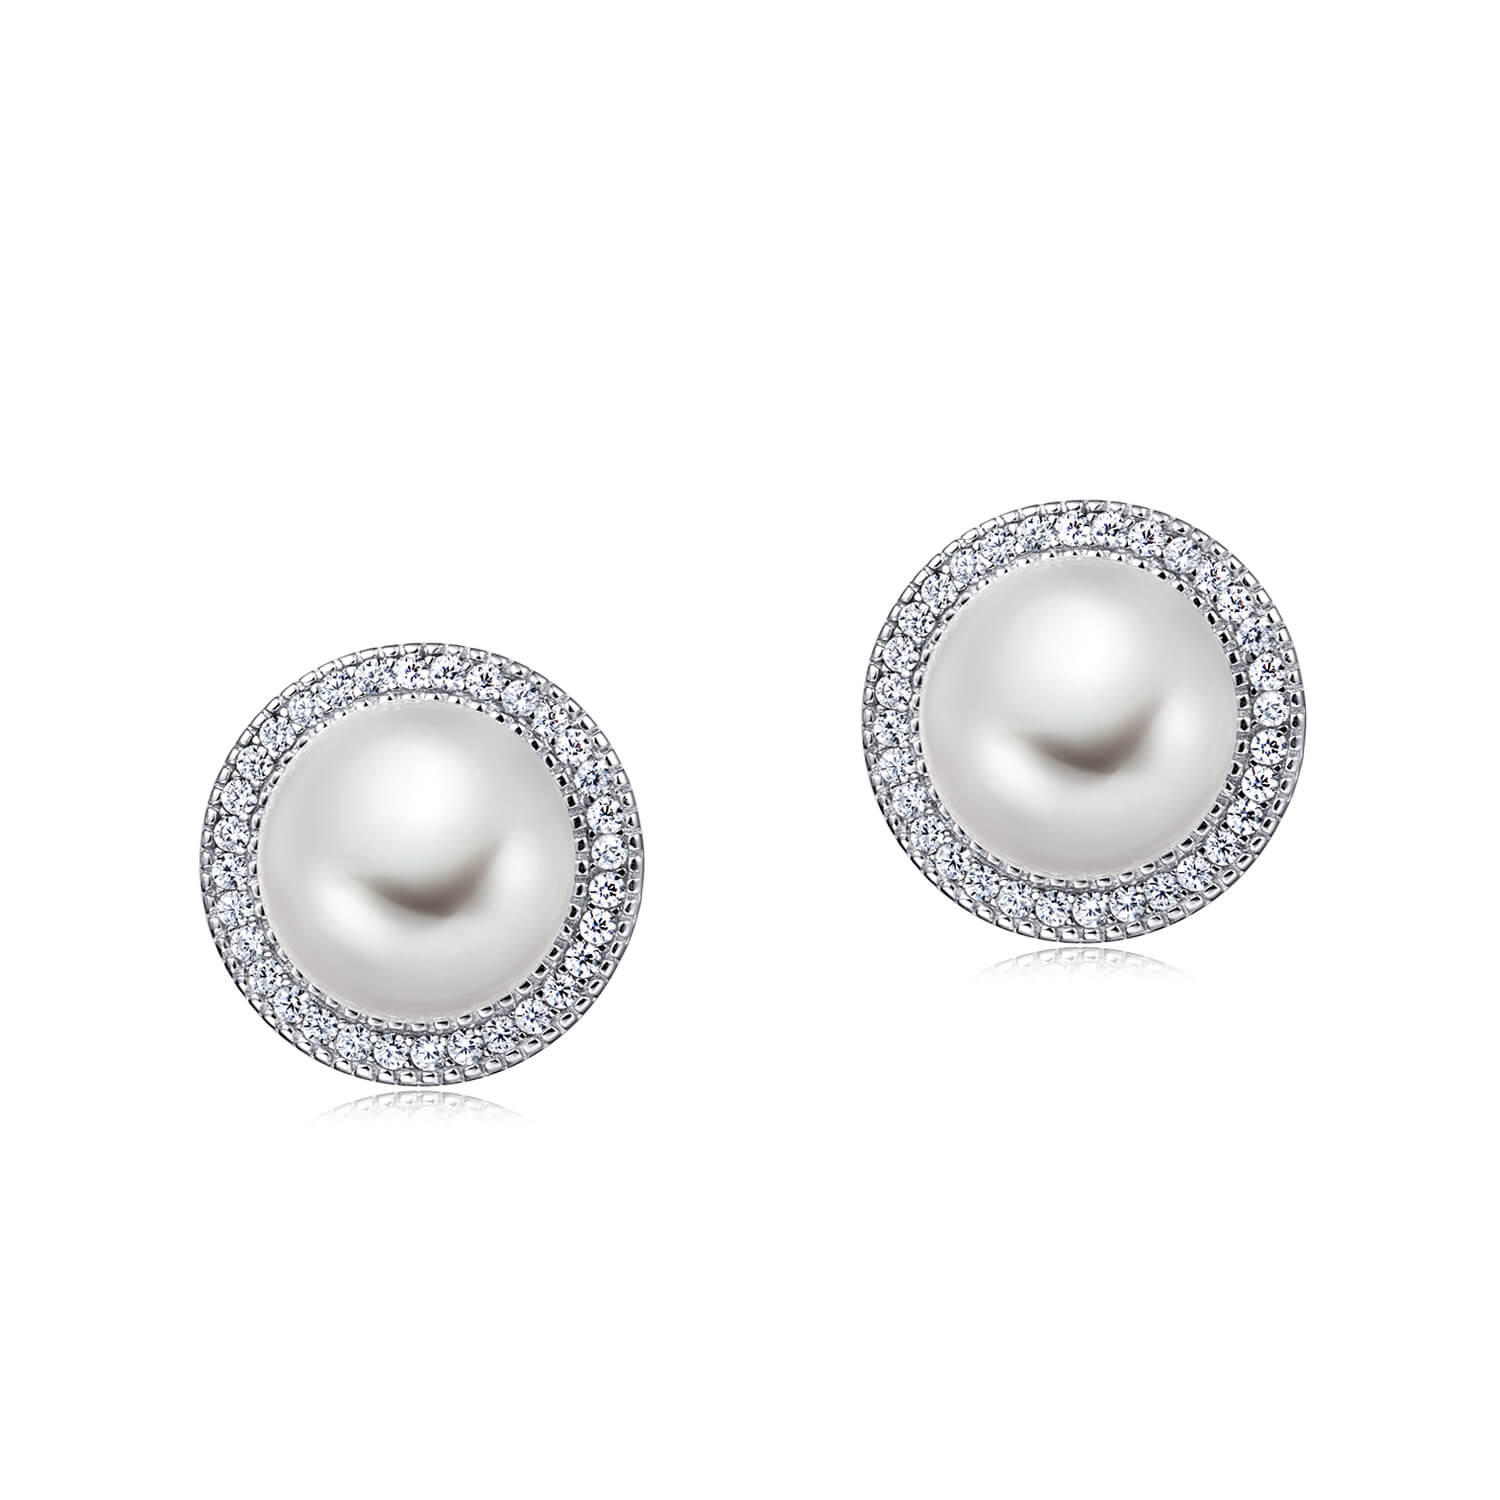 Molah 925 Silver Cultured Freshwater Pearl and Cubic Zirconia Omega Back Halo Earrings